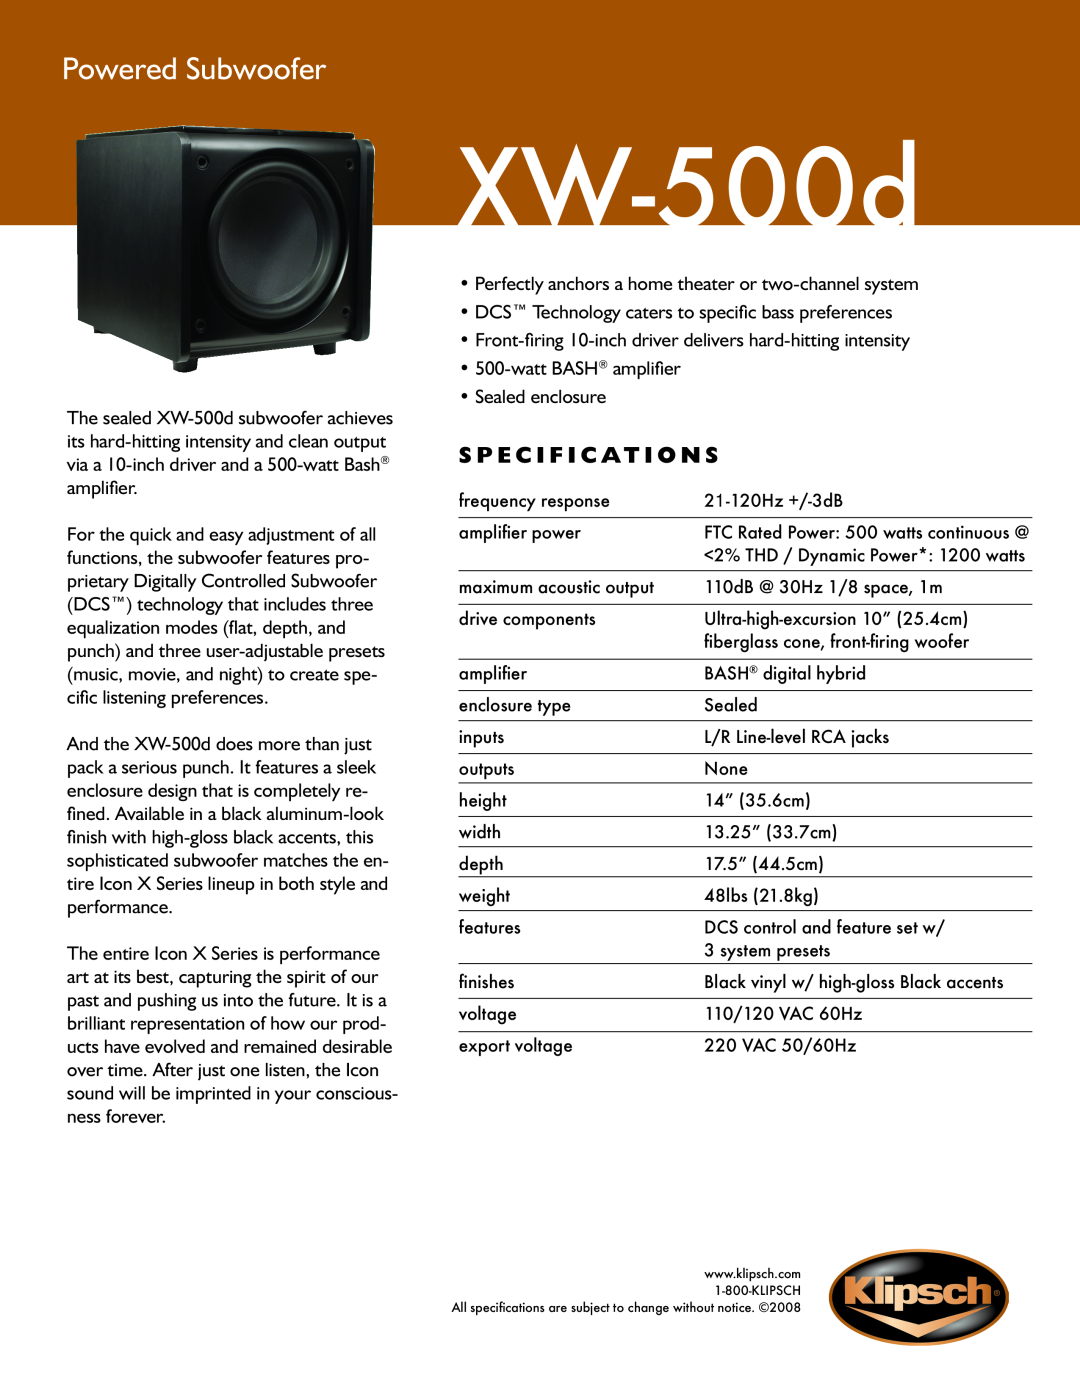 Klipsch Icon X Series specifications XW-500d, Powered Subwoofer, S p e c i f i c a t i o n s 